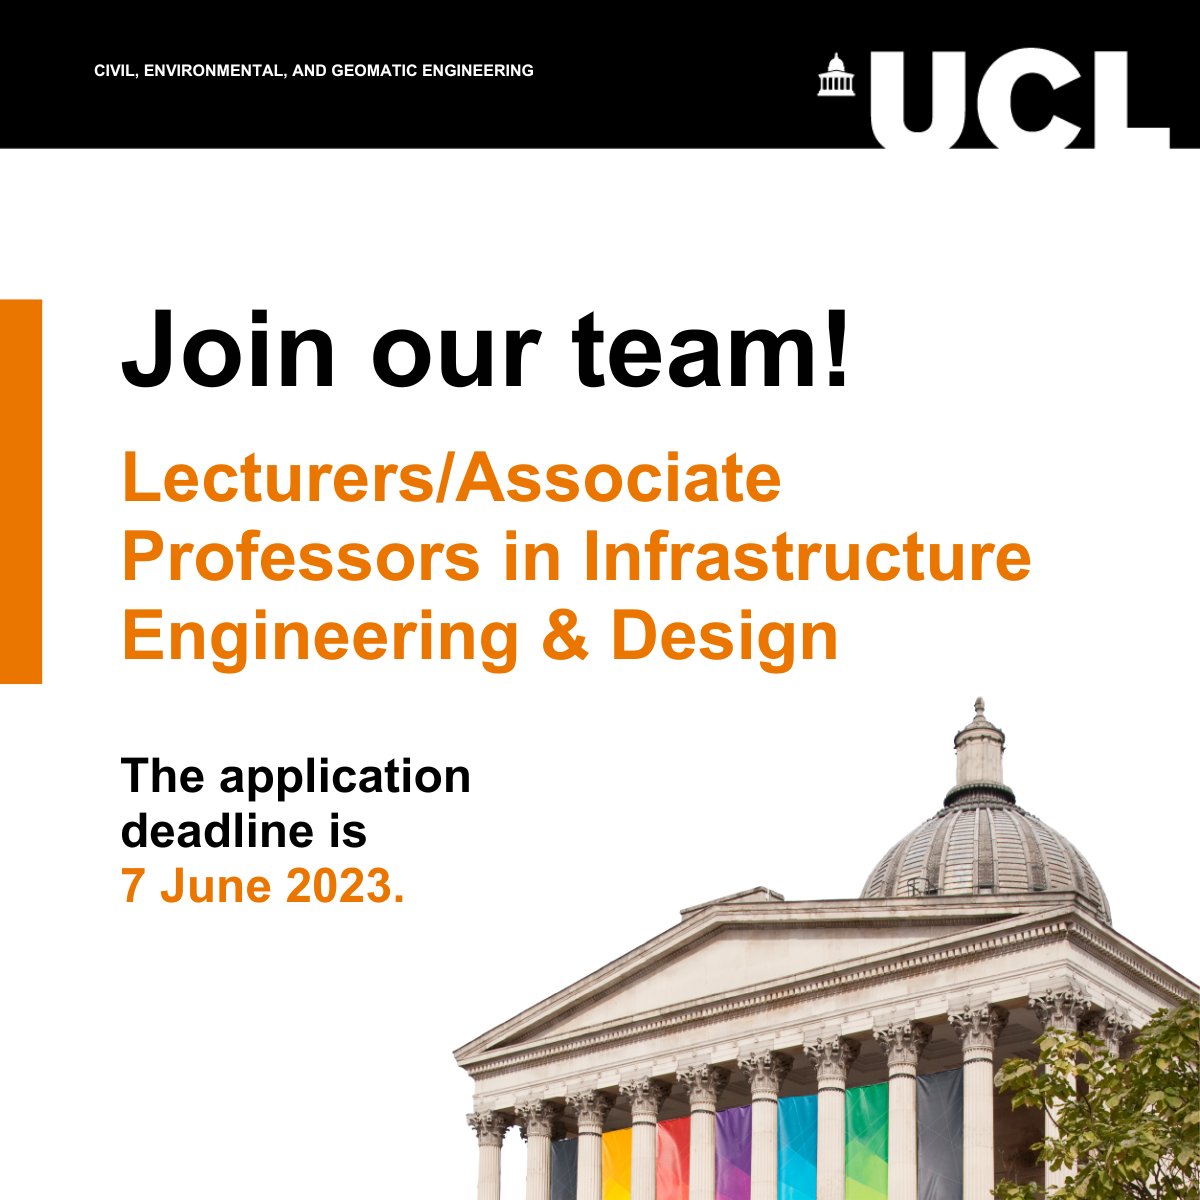 Ready to join one of UK’s top universities? We are hiring four Lecturers/Associate Professors in Infrastructure Engineering & Design to join our team and deliver ground-breaking research and education in infrastructure engineering and design. Apply now: bit.ly/3B8CPeT